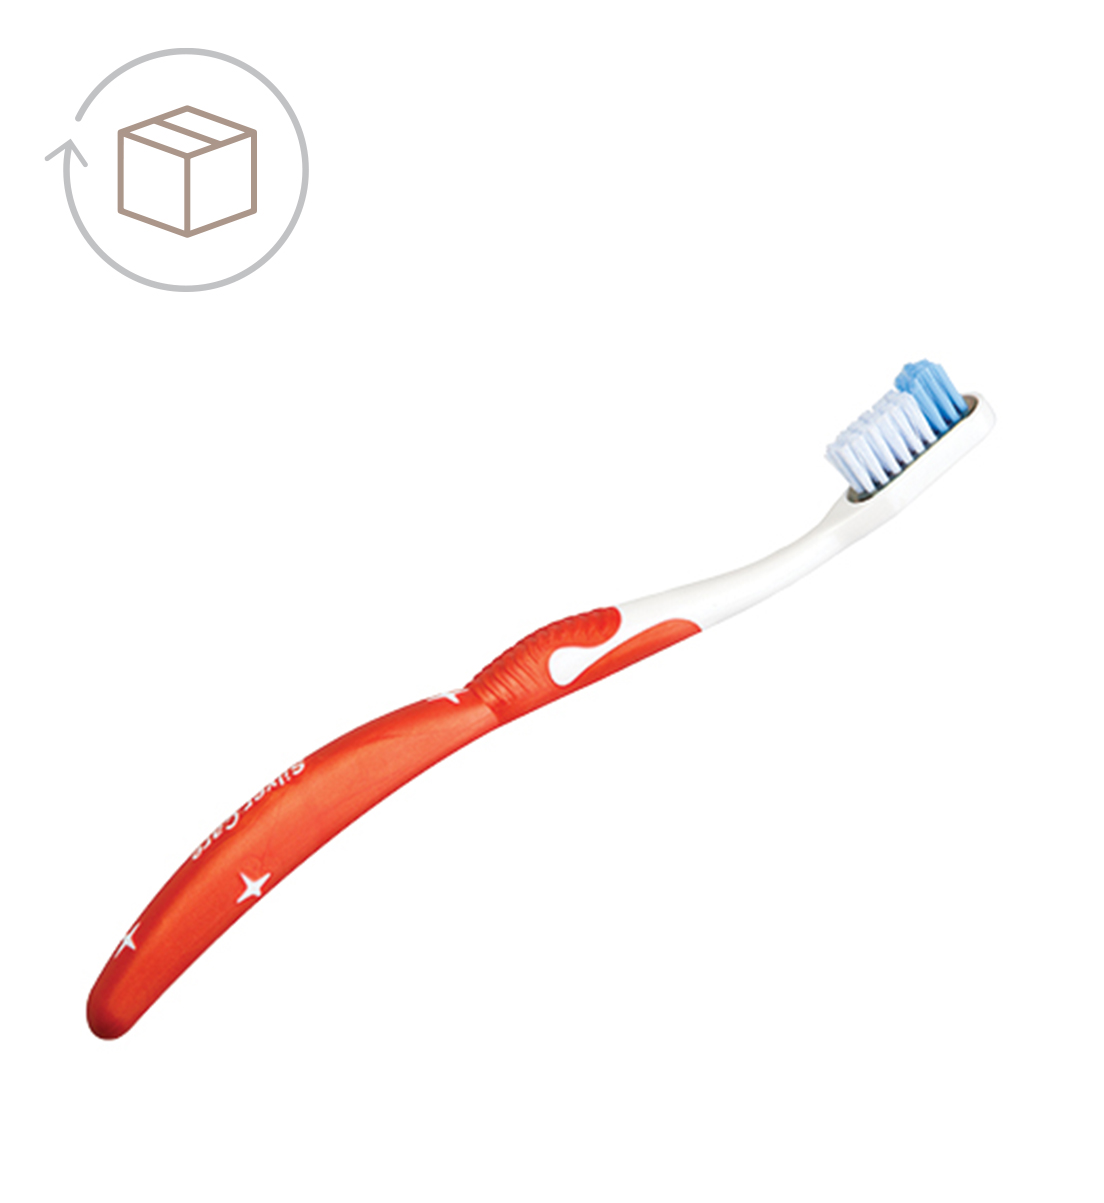 Adult Silver Care Medium Toothbrush, red